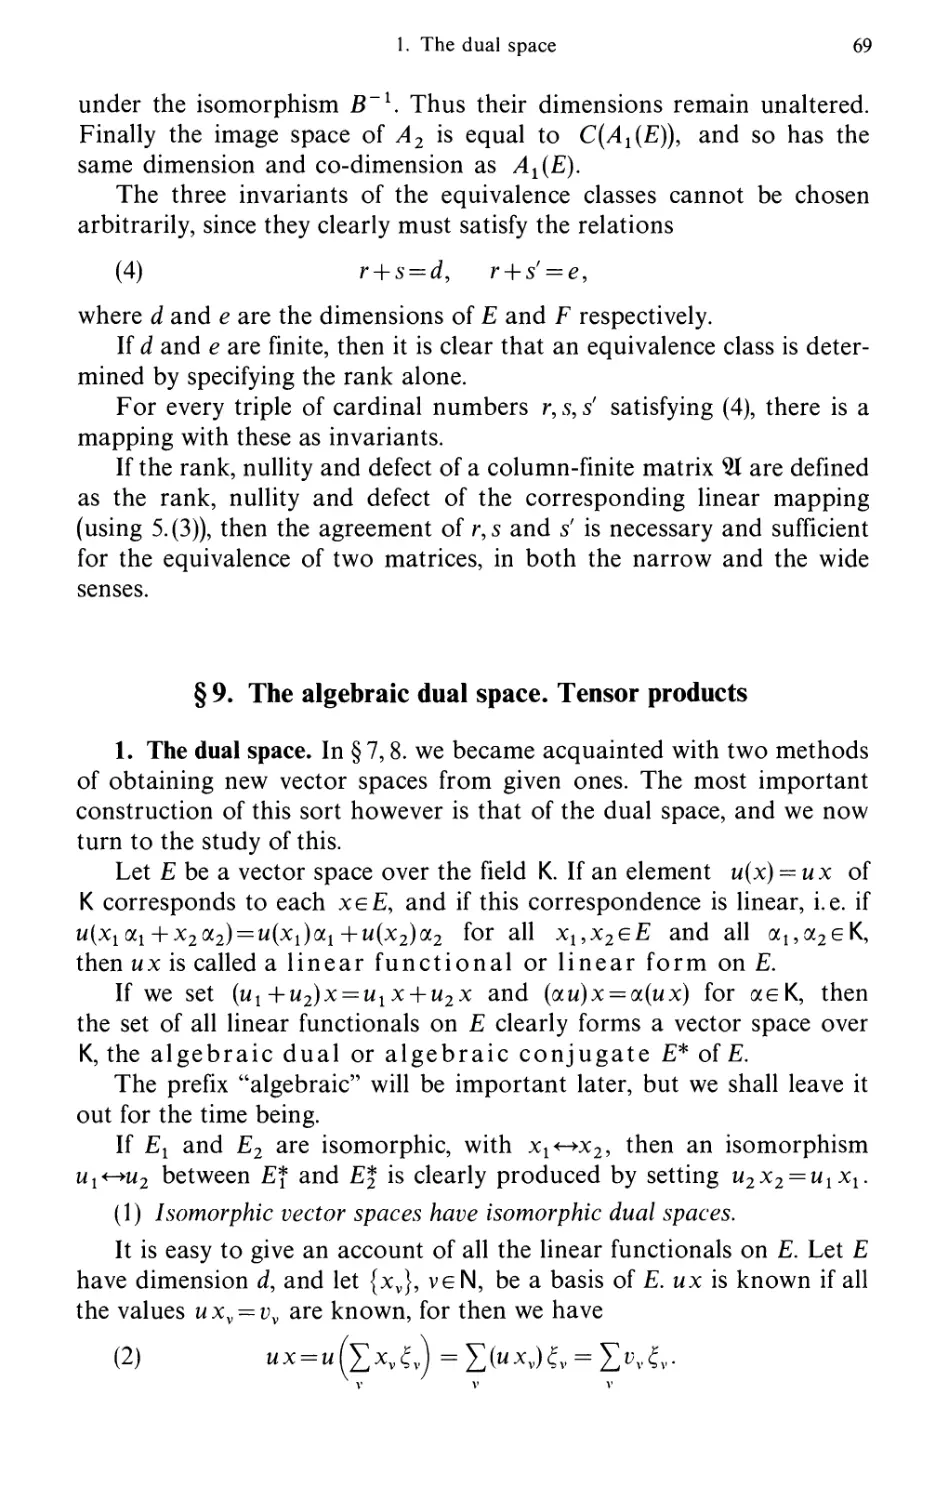 §9. The algebraic dual space. Tensor products